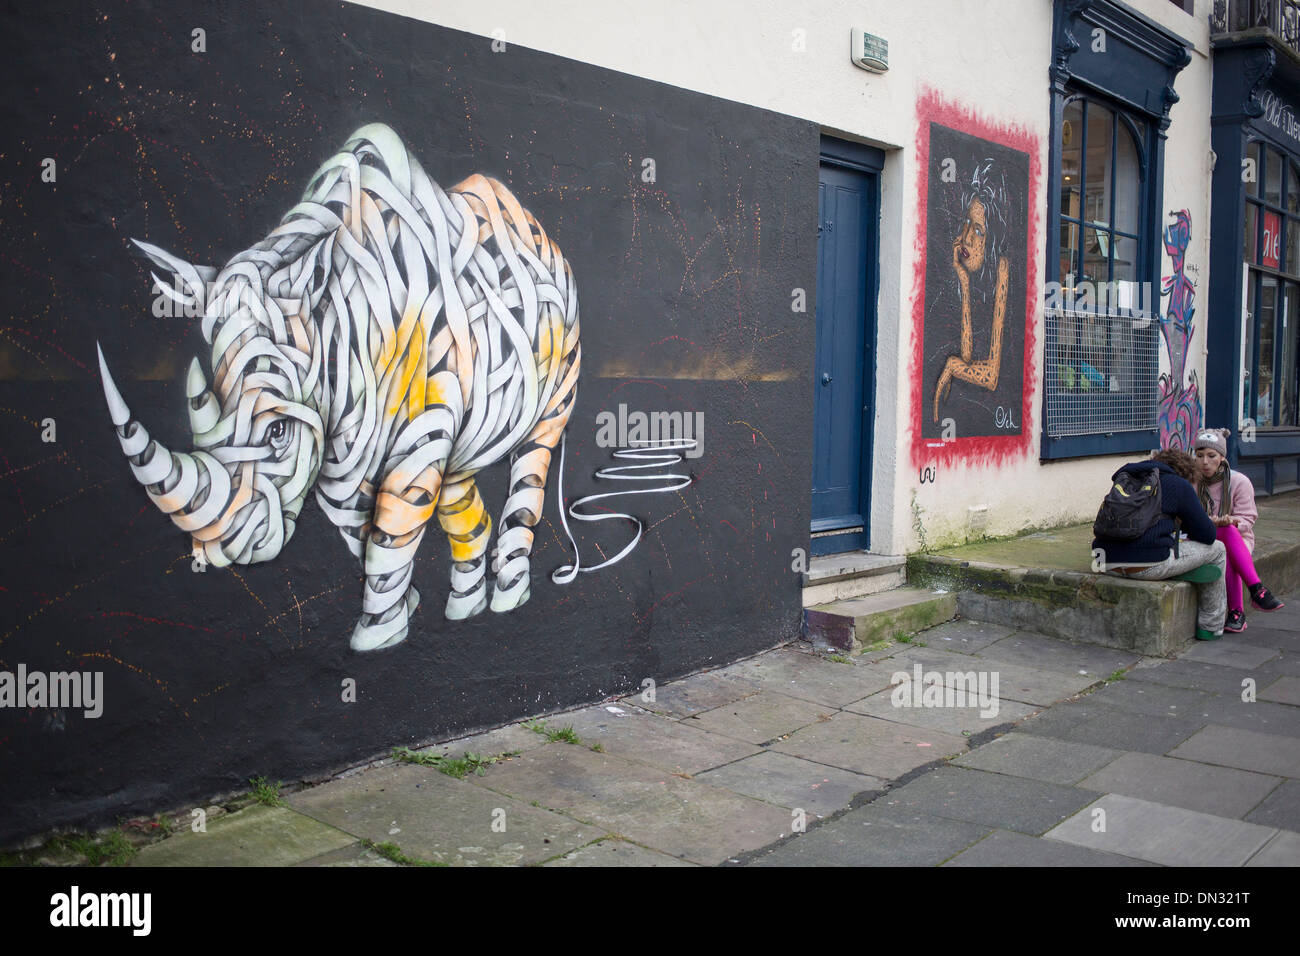 Rhino street art in Camden Town, London, UK. Graffiti in it's most creative sense is popping up all over London and has become part of the urban landscape. UK Stock Photo